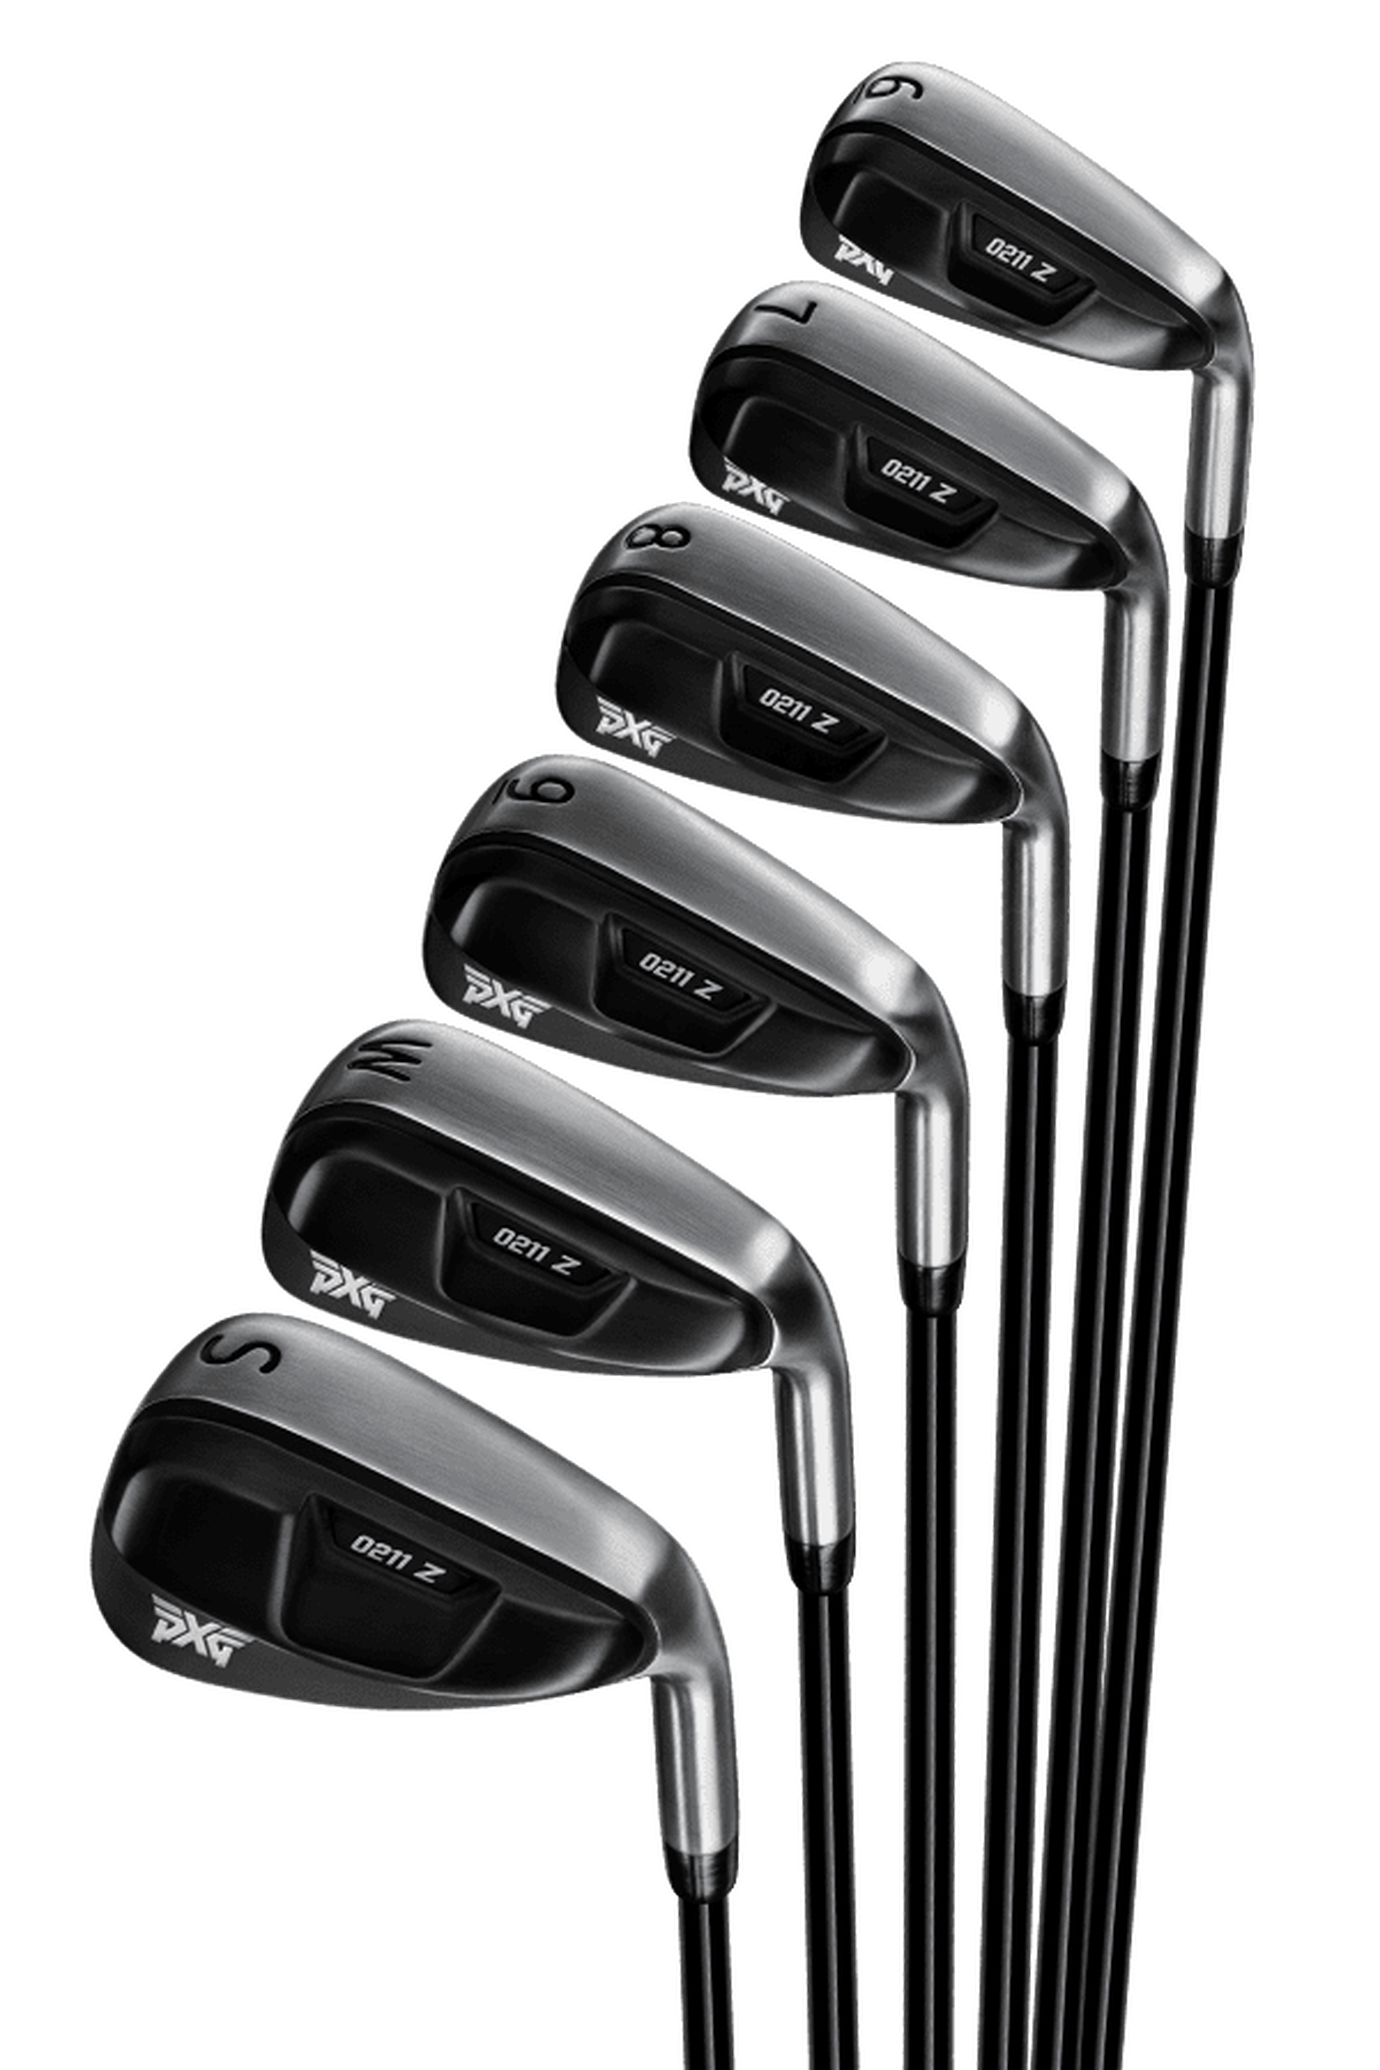 Buy PXG 0211Z Golf Clubs - Driver, Woods, Hybrid-Irons | PXG